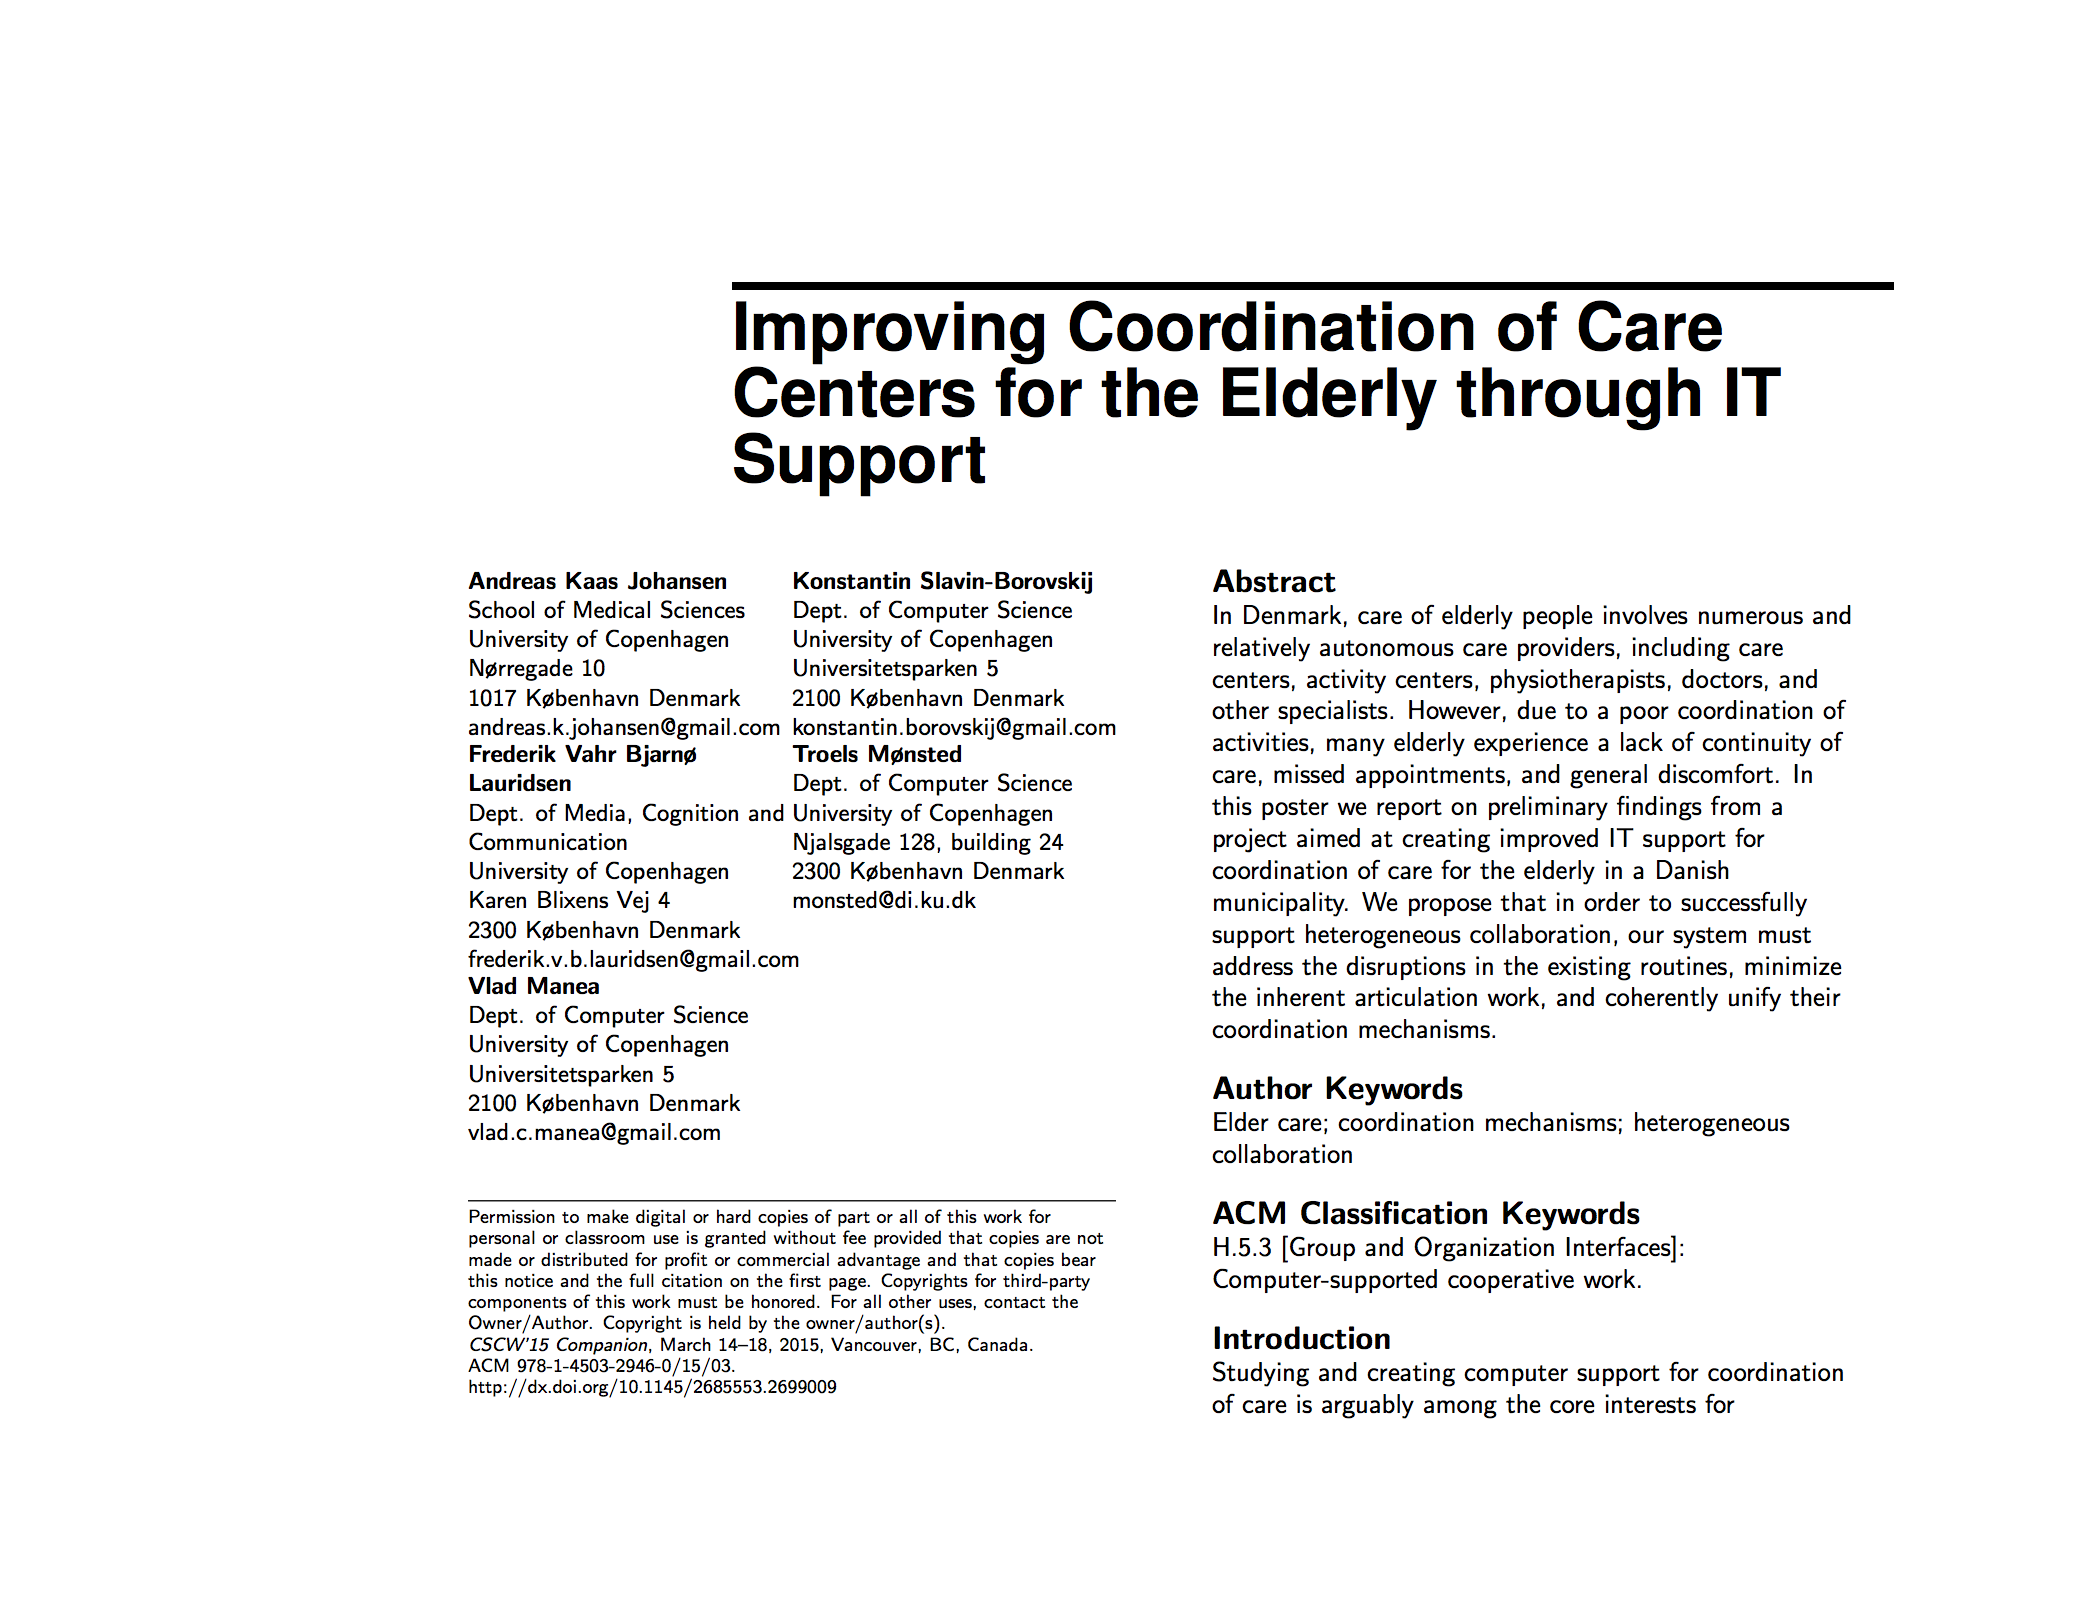 Improving Coordination of Care Centers for the Elderly through IT Support poster